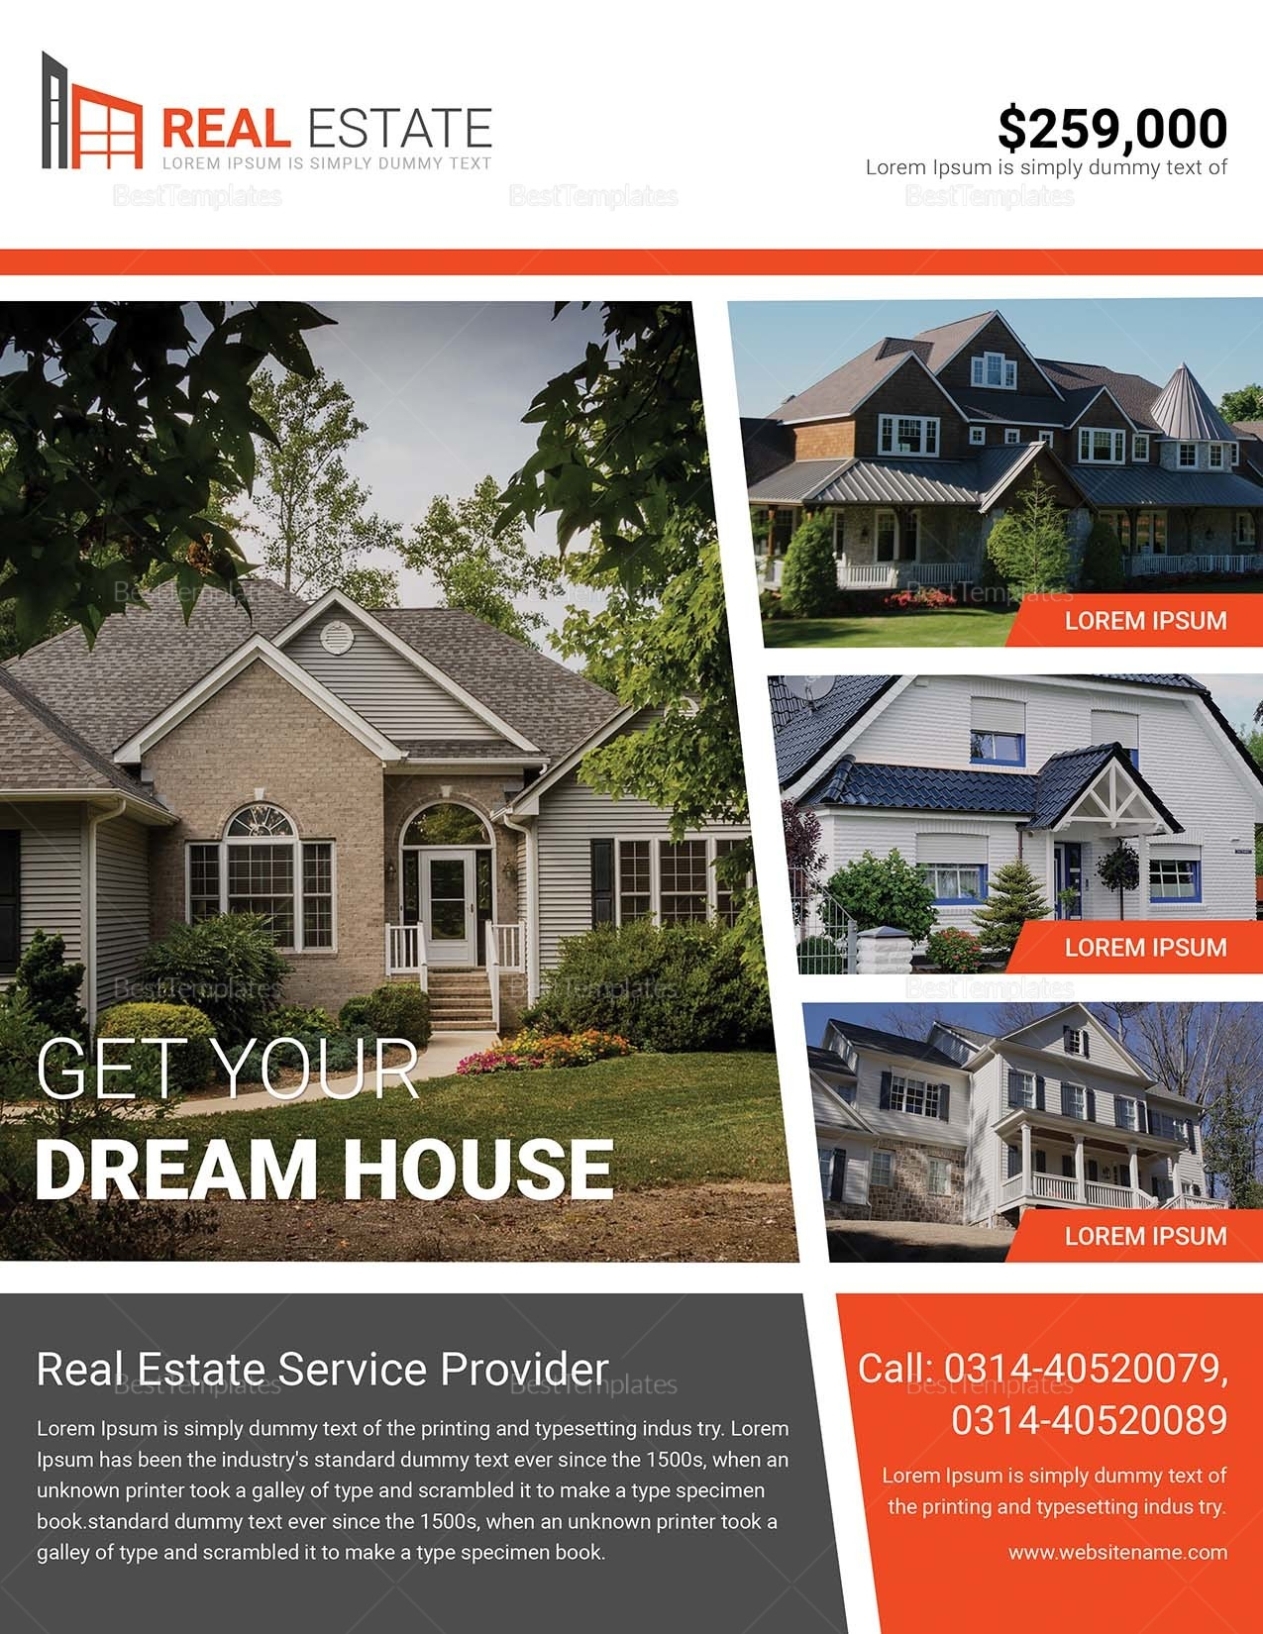 Dream Home Real Estate Flyer Design Template In Word, Psd, Publisher with Realtor Flyer Template